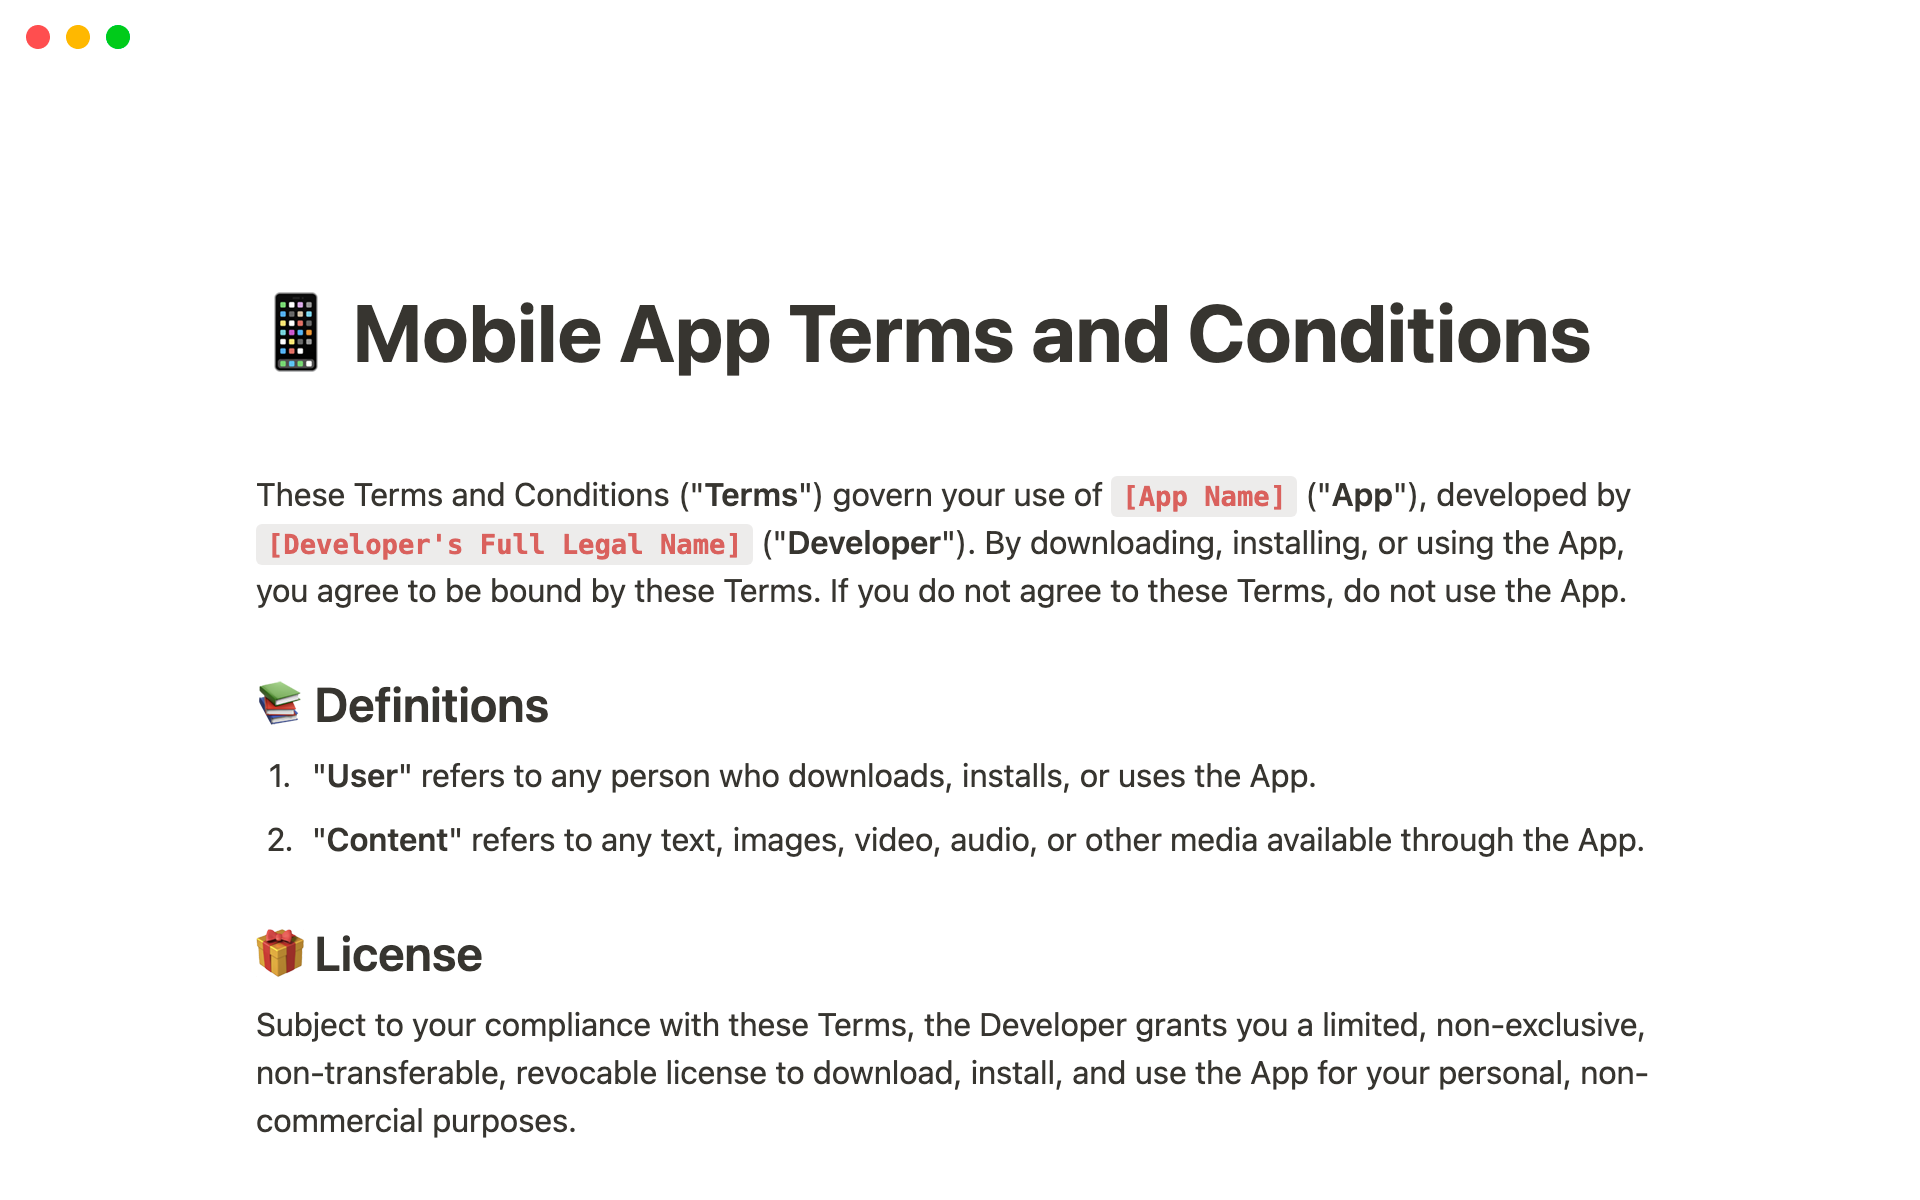 A detailed template for mobile app developers, specifying the rules and guidelines for using their app, including disclaimers, user conduct, and data privacy policies.